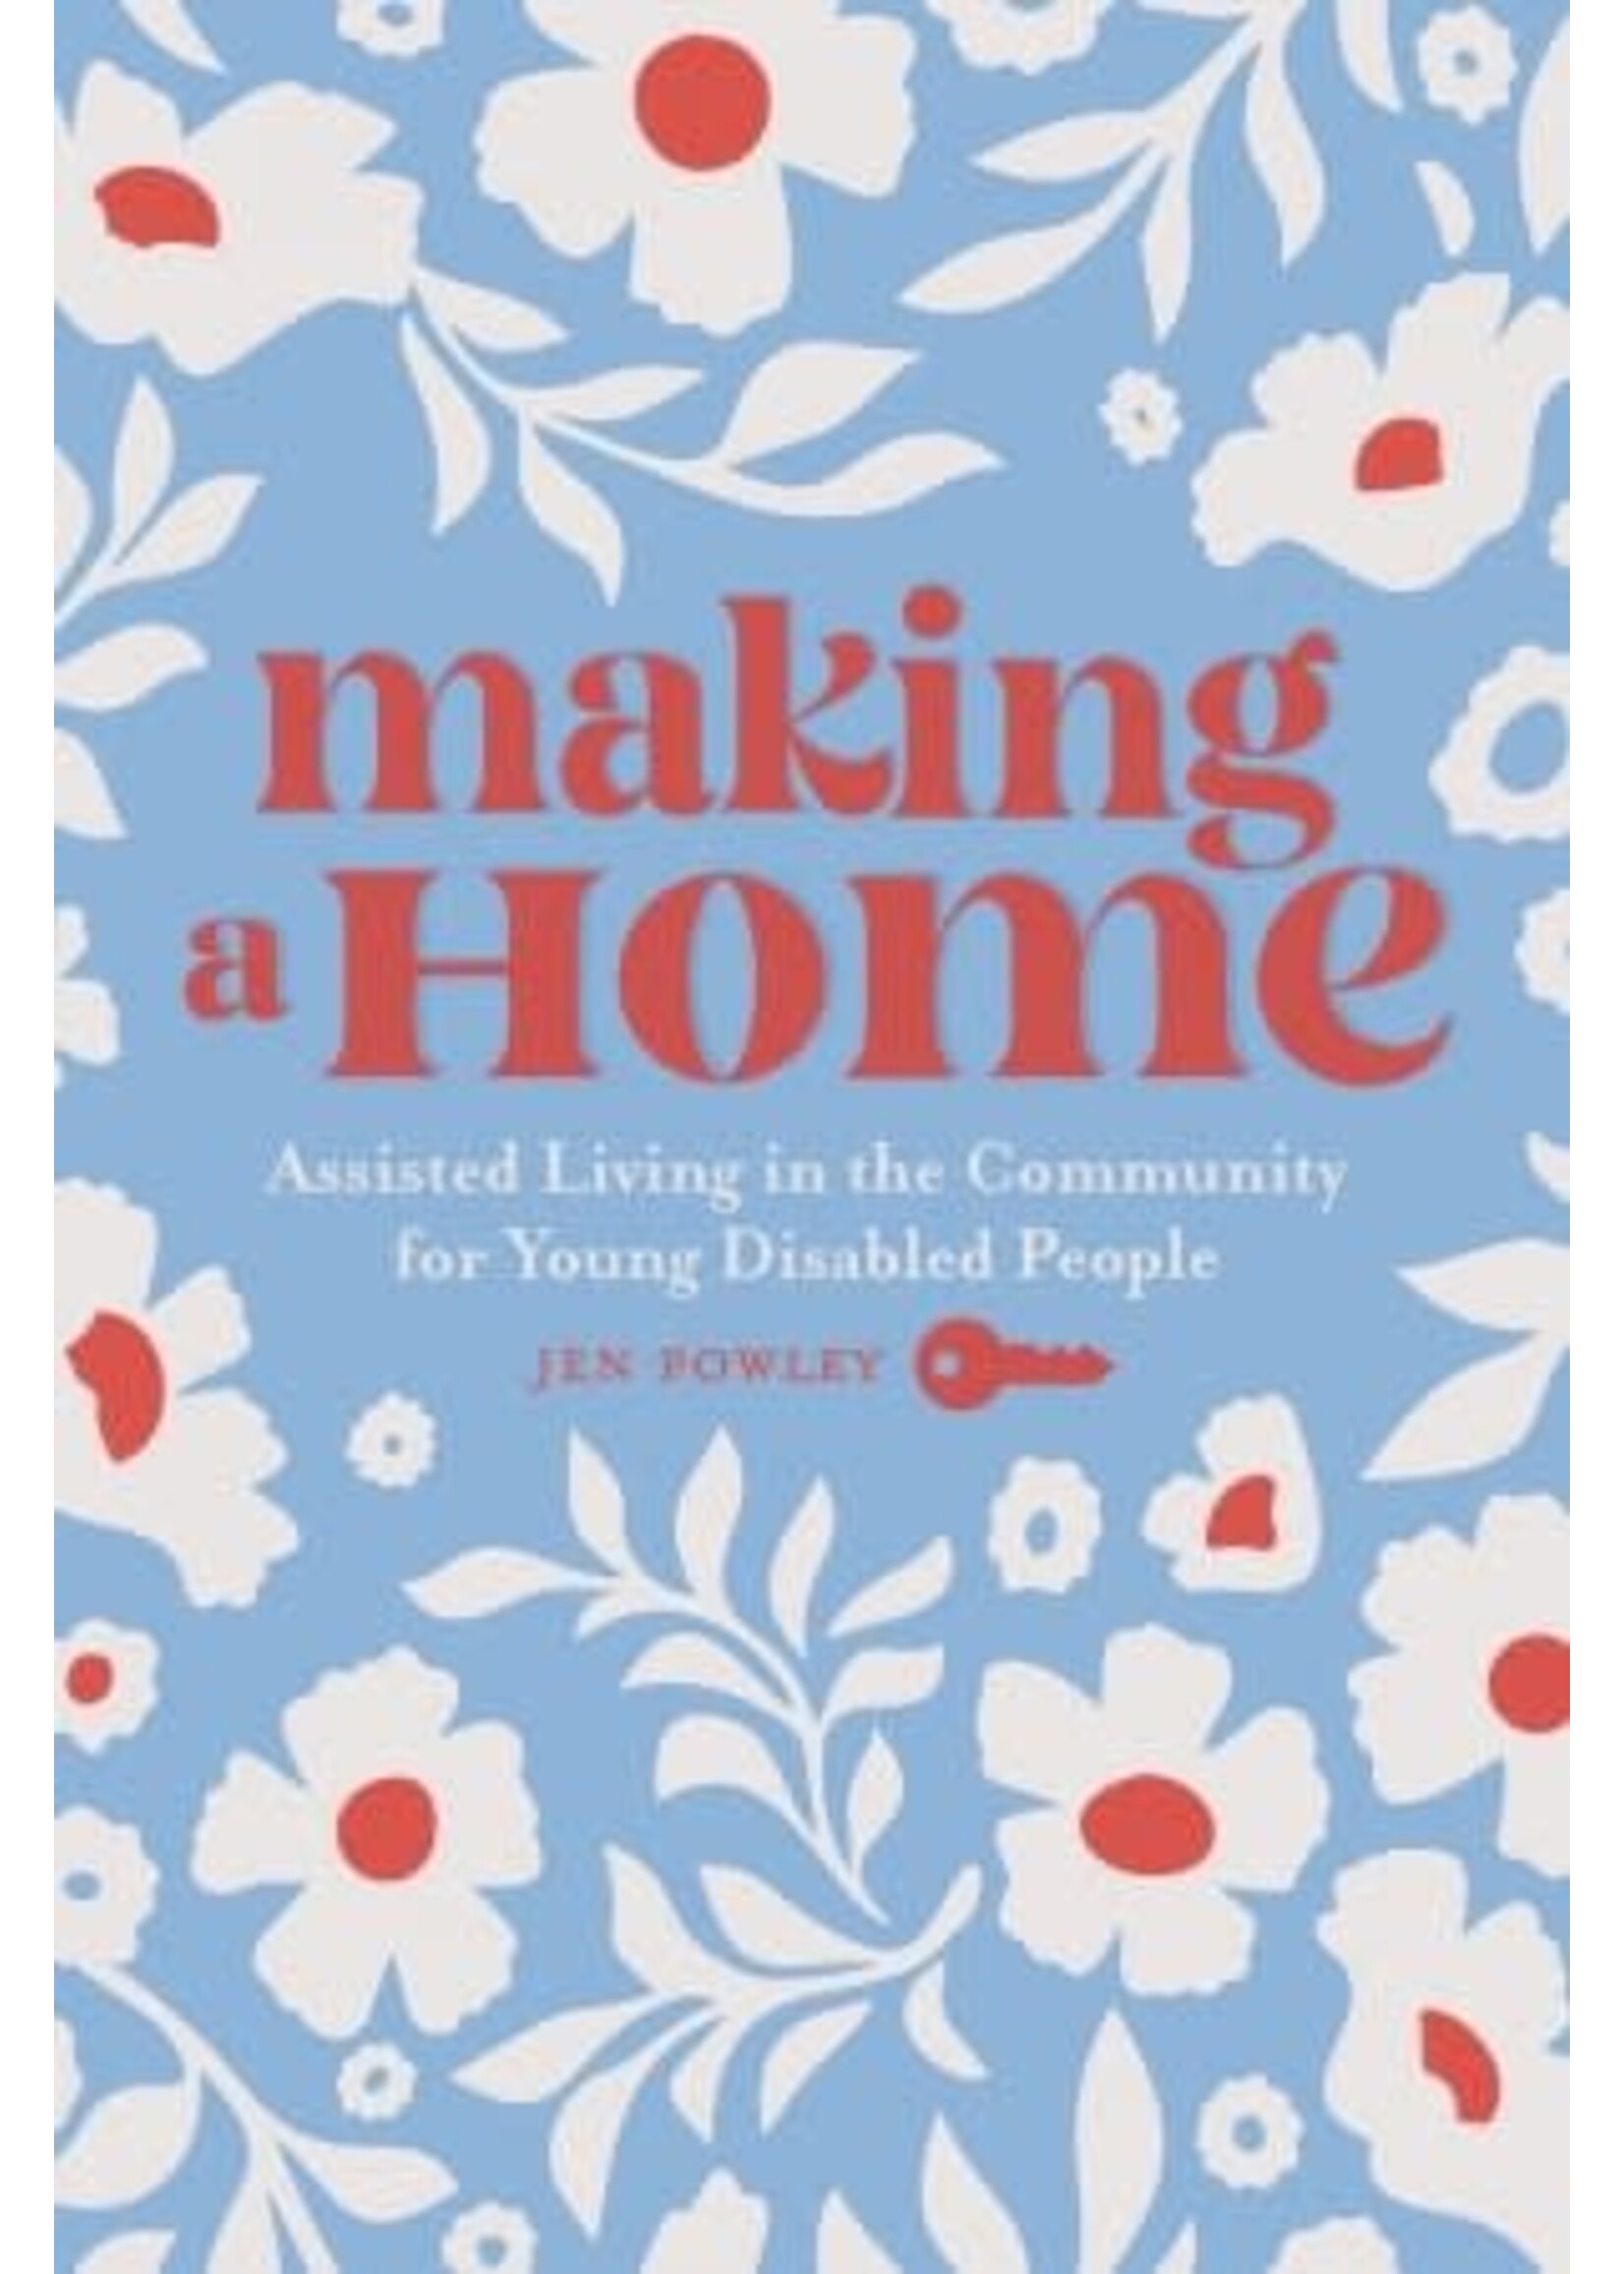 Making a Home: Assisted Living in the Community for Young Disabled People by Jen Powley